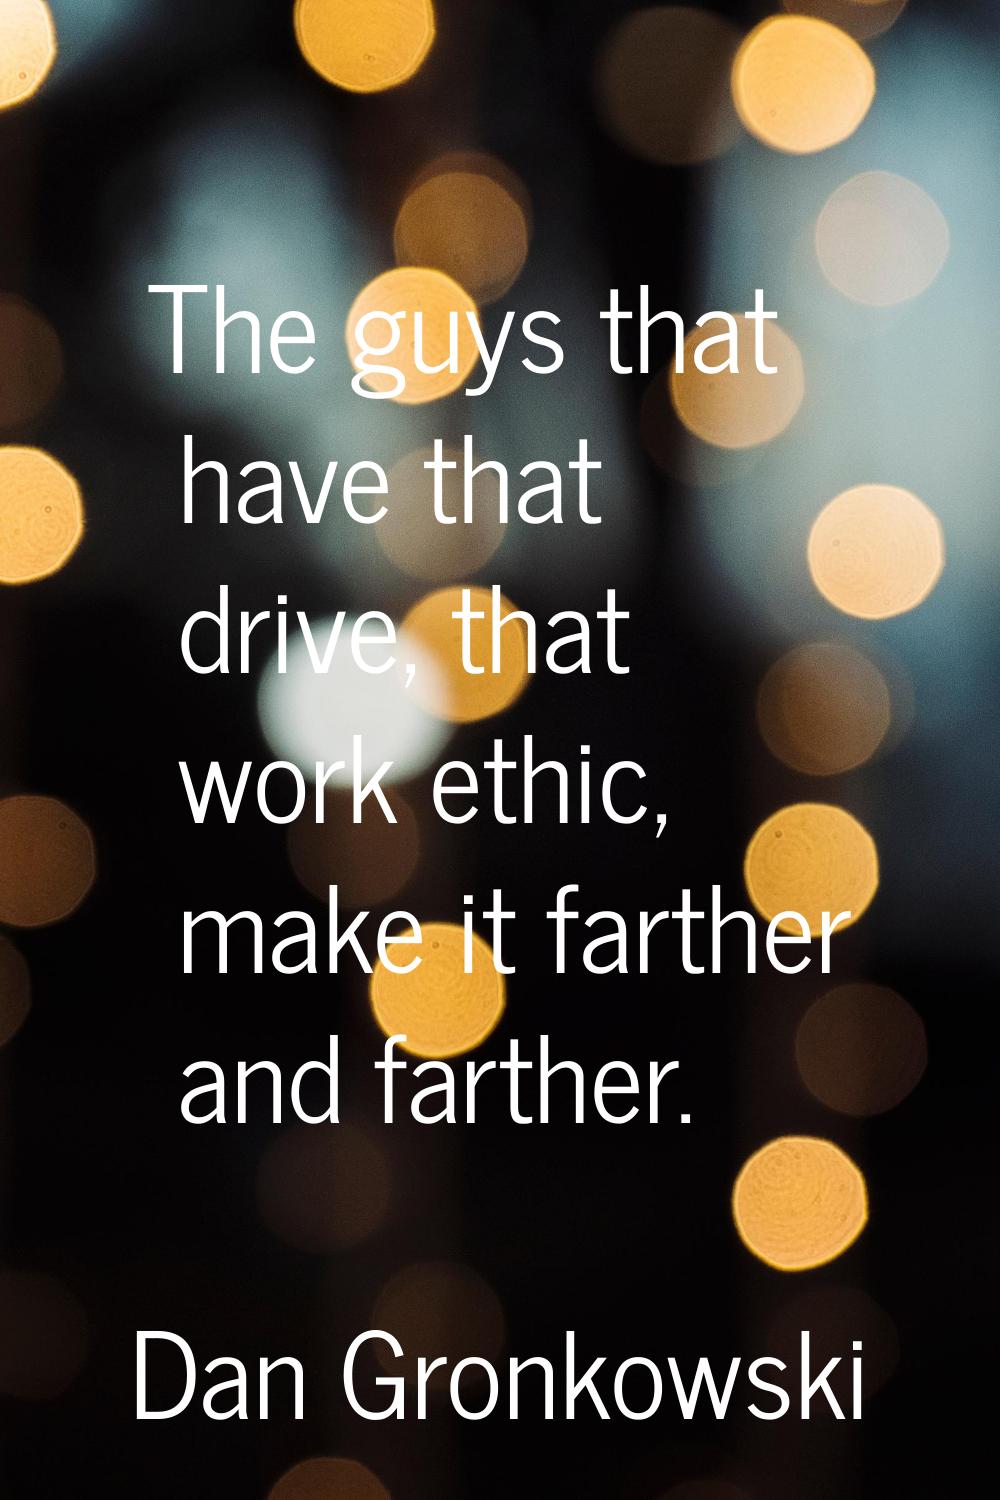 The guys that have that drive, that work ethic, make it farther and farther.